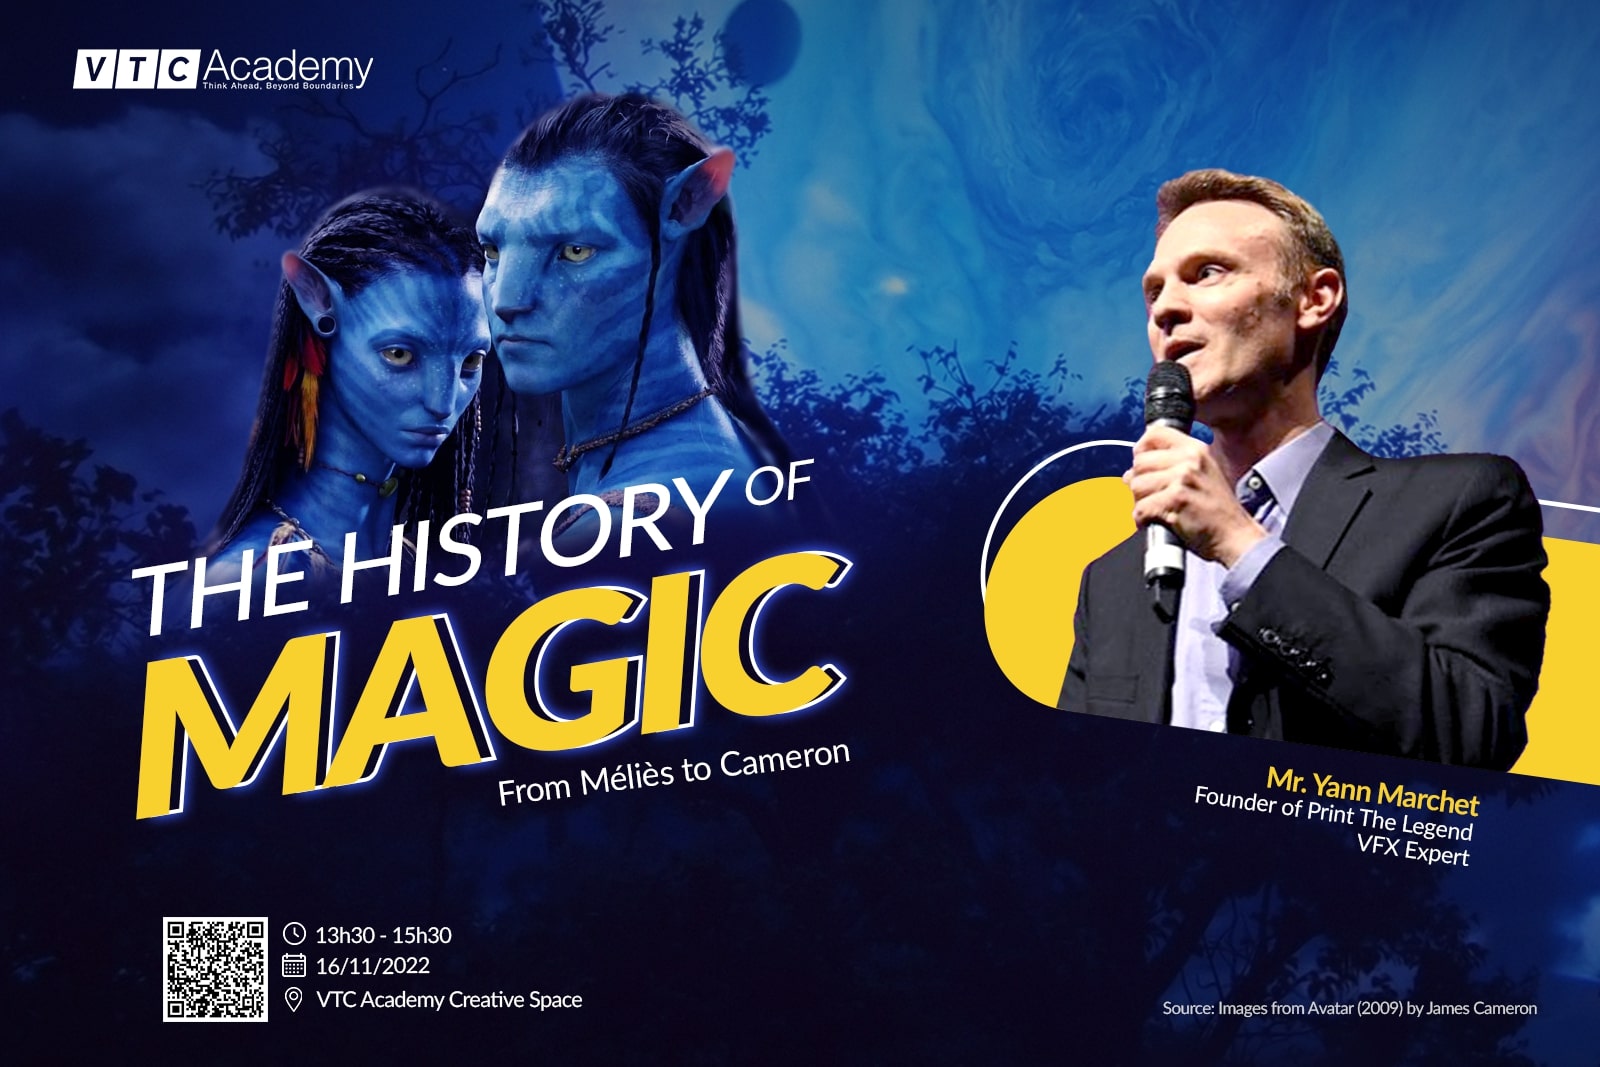 Special Lecturer’s session: From Méliès to Cameron: The History of Magic